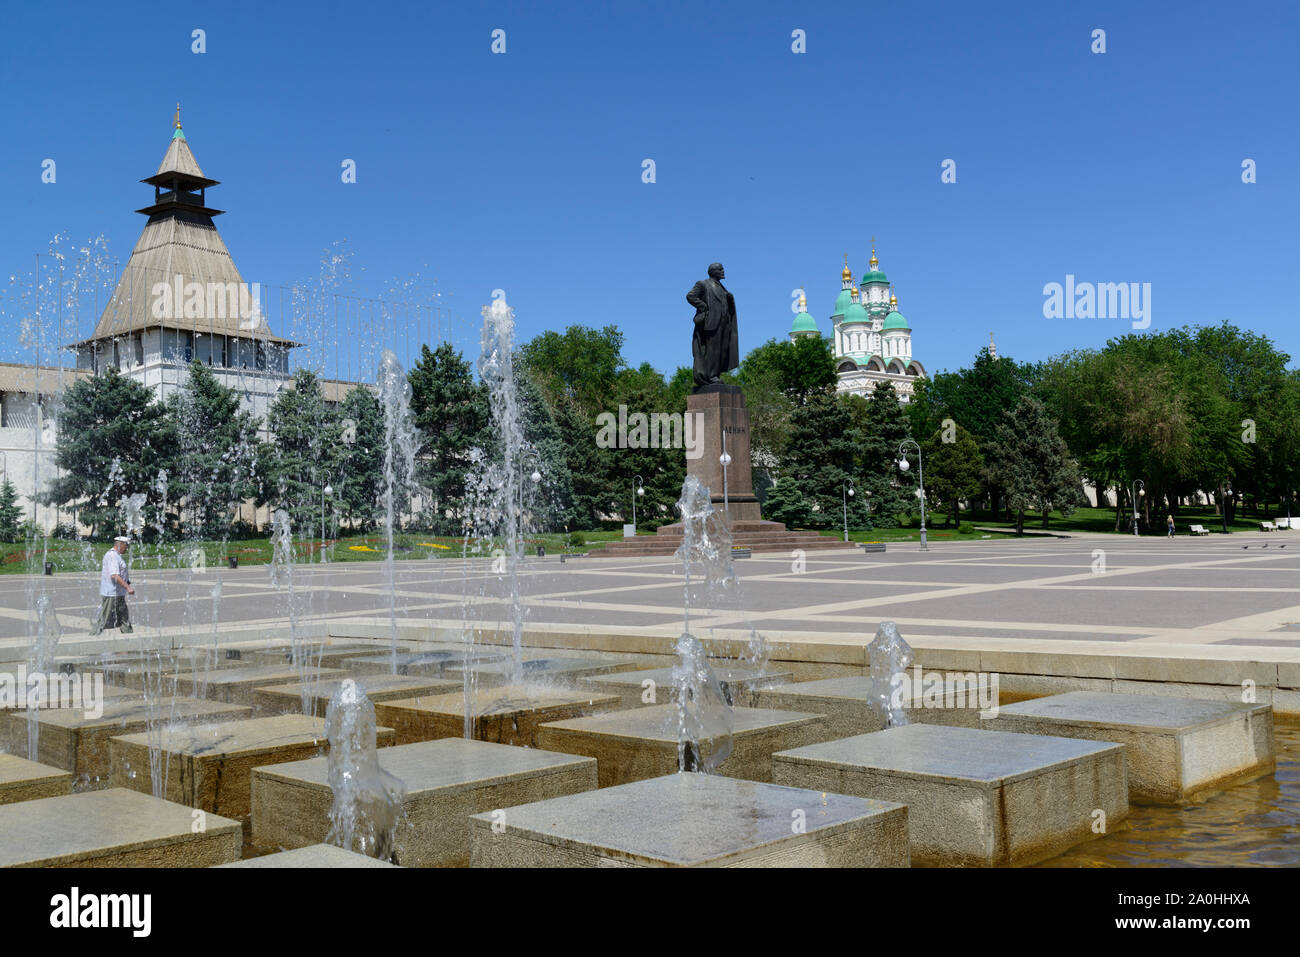 The Kremlin in Astrakhan, Astrakhan Oblast, Russia. Fountain and statue of Lenin outside the wall. Stock Photo